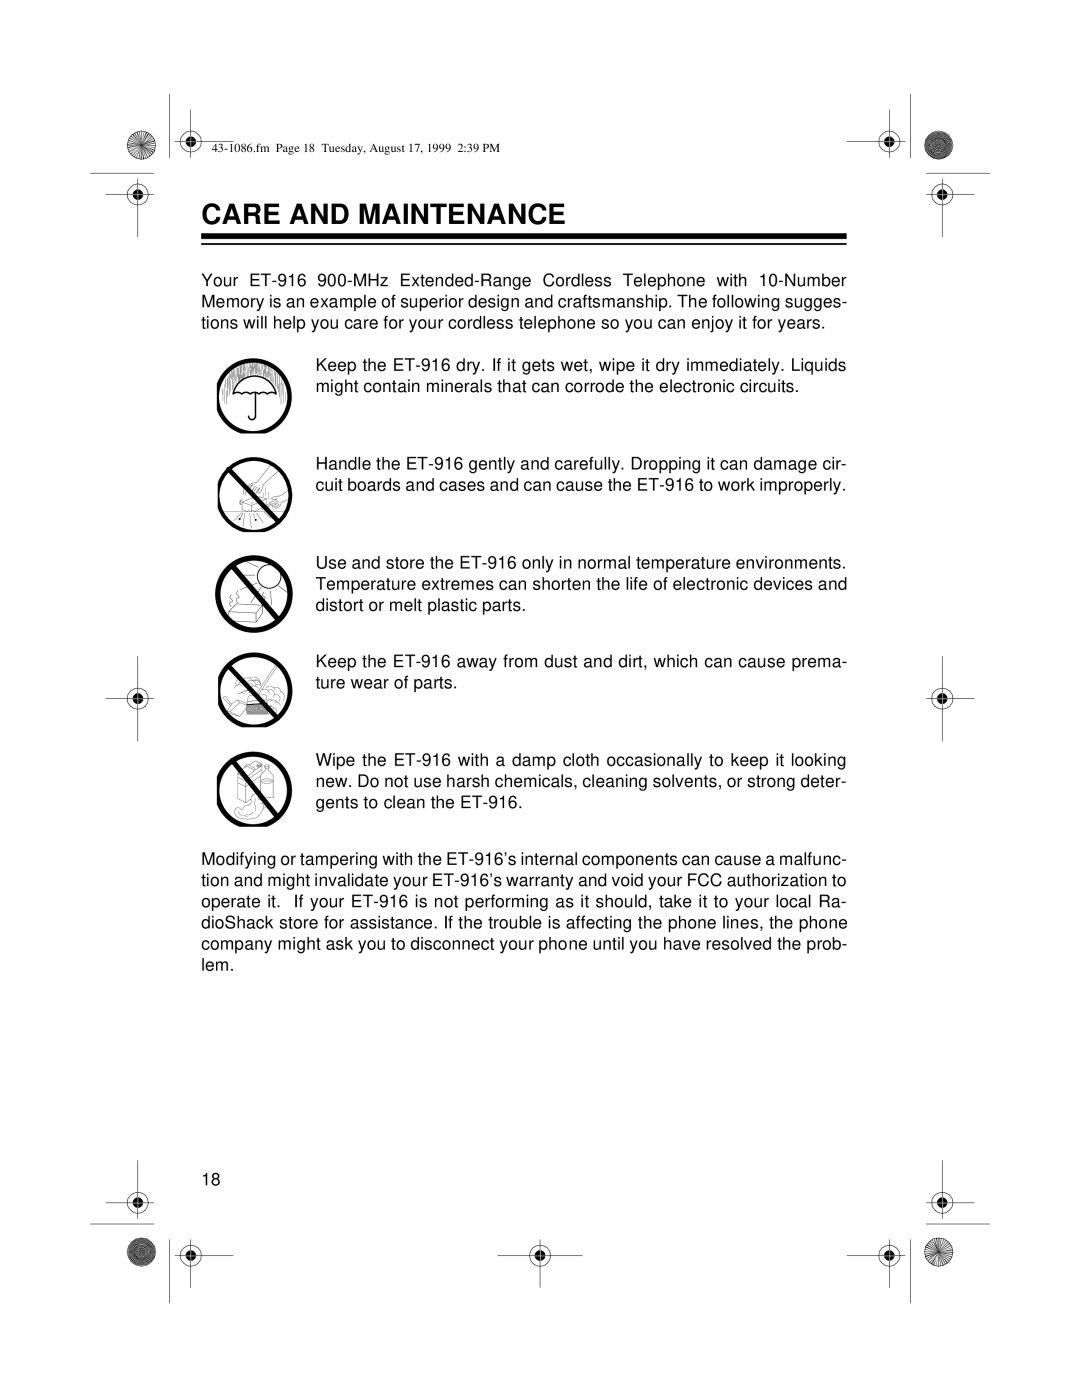 Radio Shack ET-916 owner manual Care And Maintenance, fm Page 18 Tuesday, August 17, 1999 239 PM 